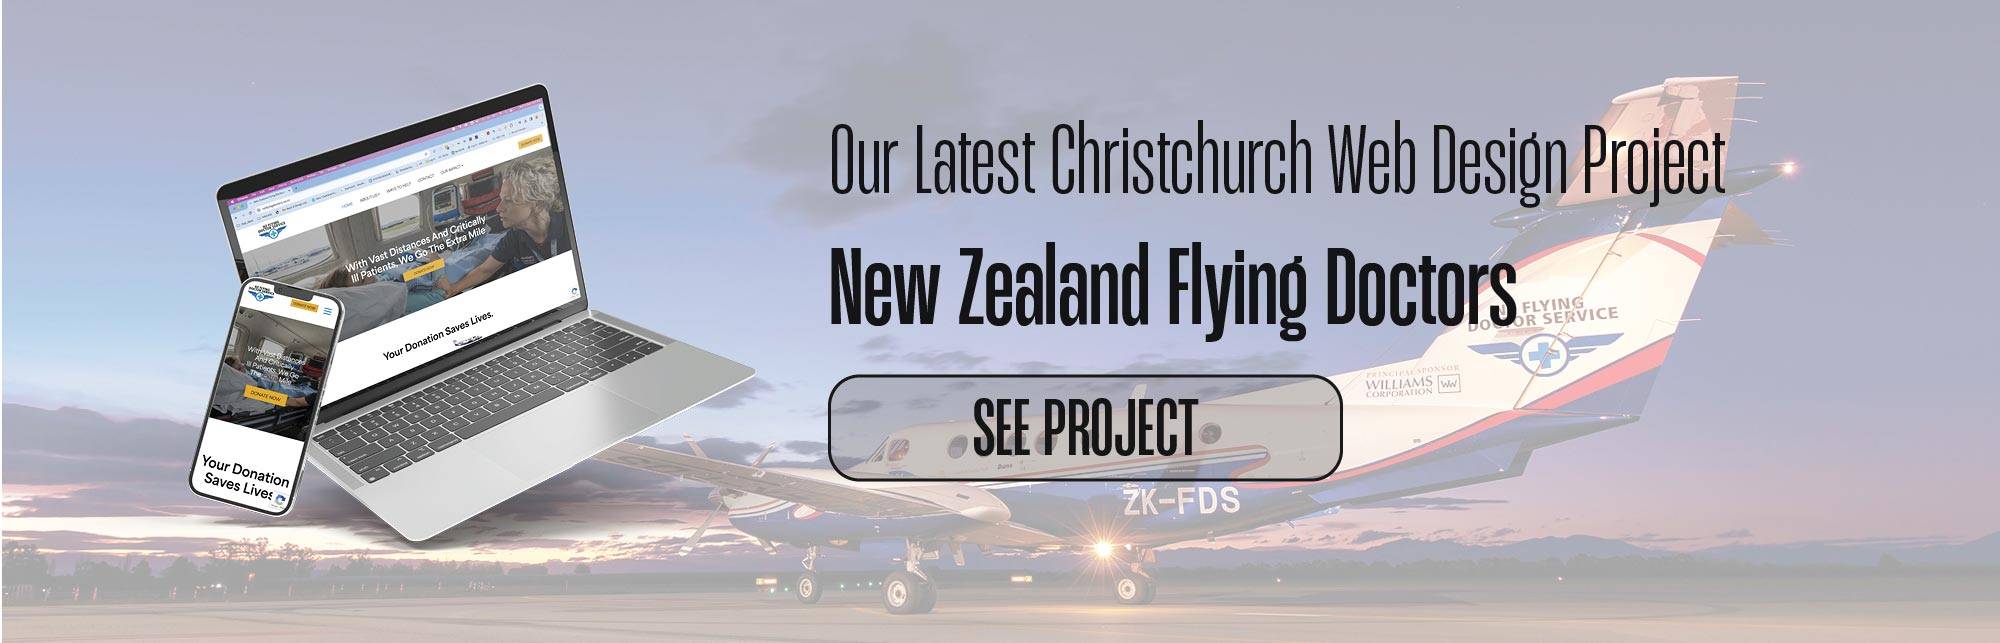 Example-of-Back9-Creative-Project-for-web-design-christchurch